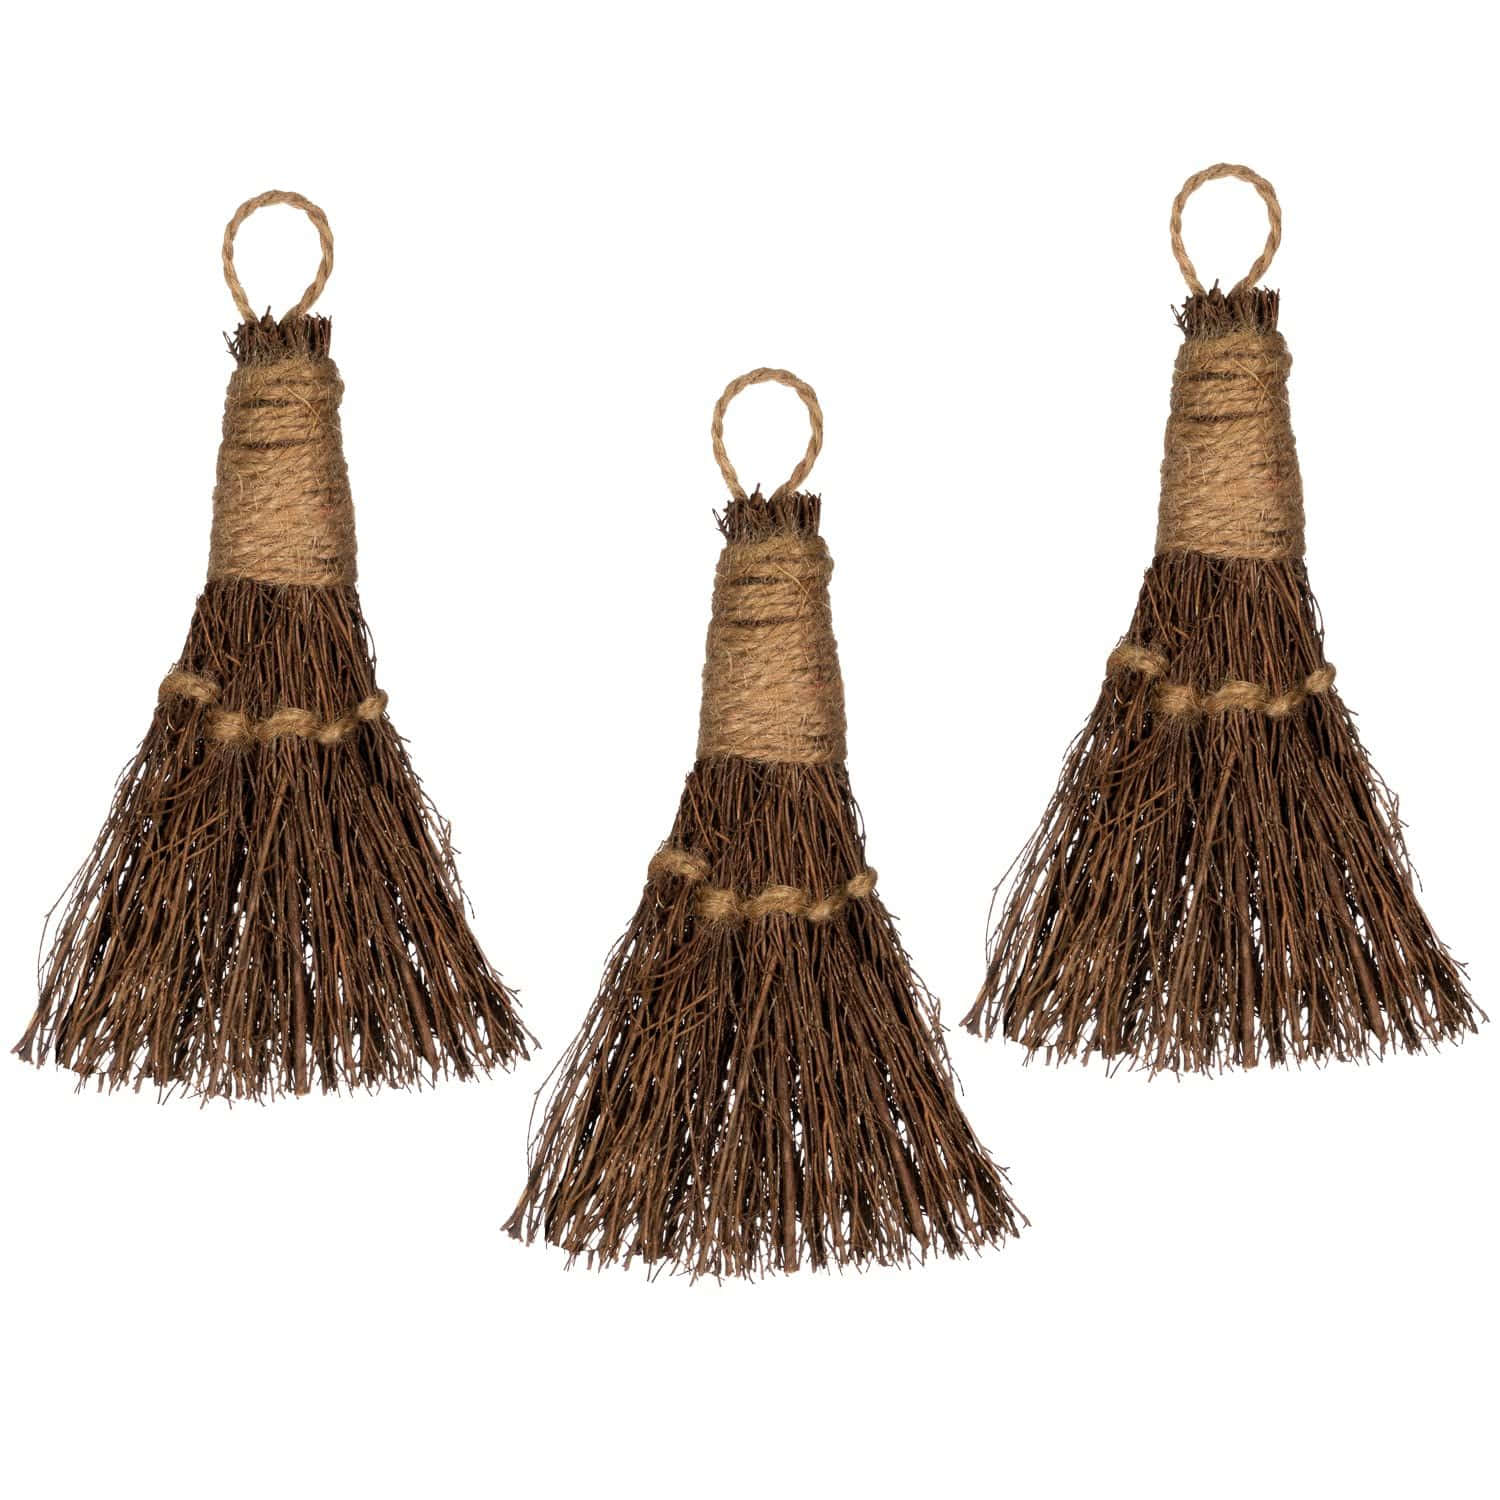 Broom With Holder Pictures